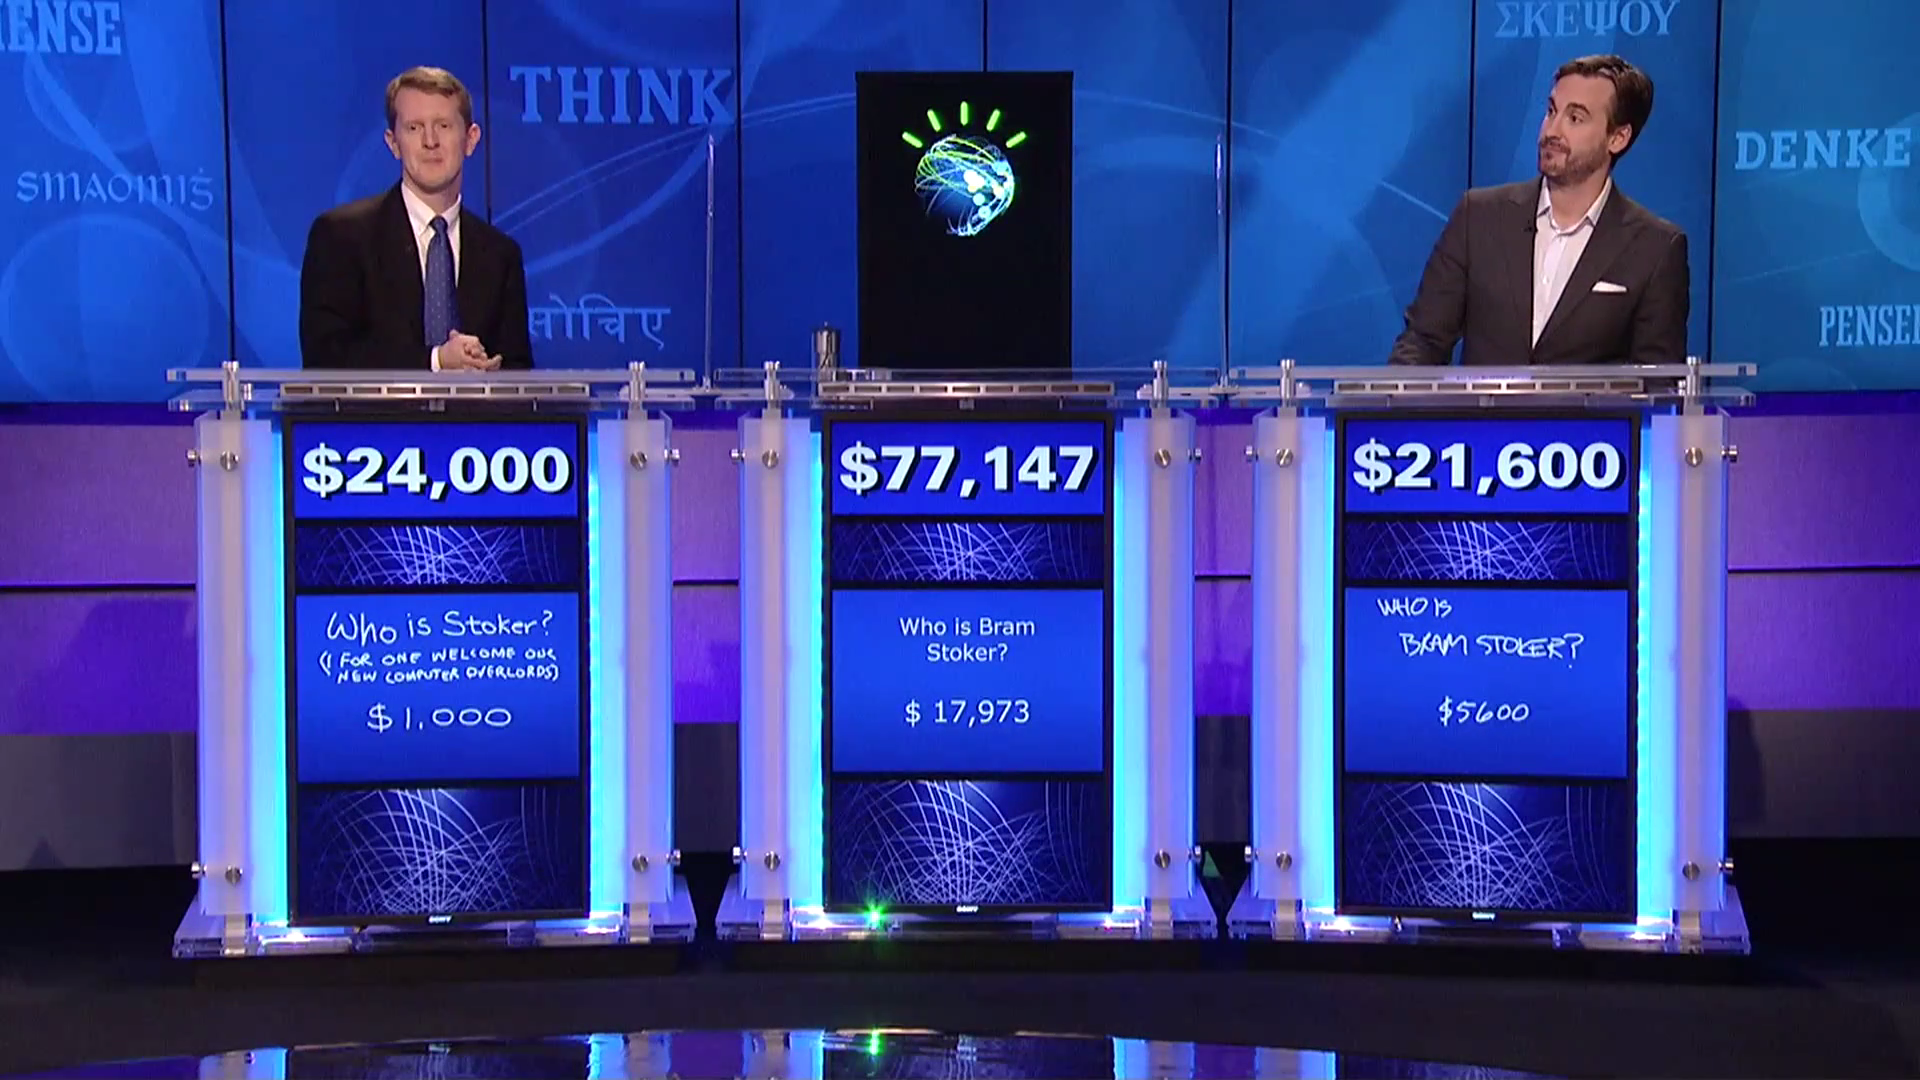 Two 'Jeopardy!' champions, Ken Jennings, left, and Brad Rutter, competed against IBM's Watson supercomputer, which proved adept at buzzing in quickly, as bouts were taped at the IBM research center in Yorktown Heights, New York, and February 16, 2011 was the broadcasting date of the final episode.